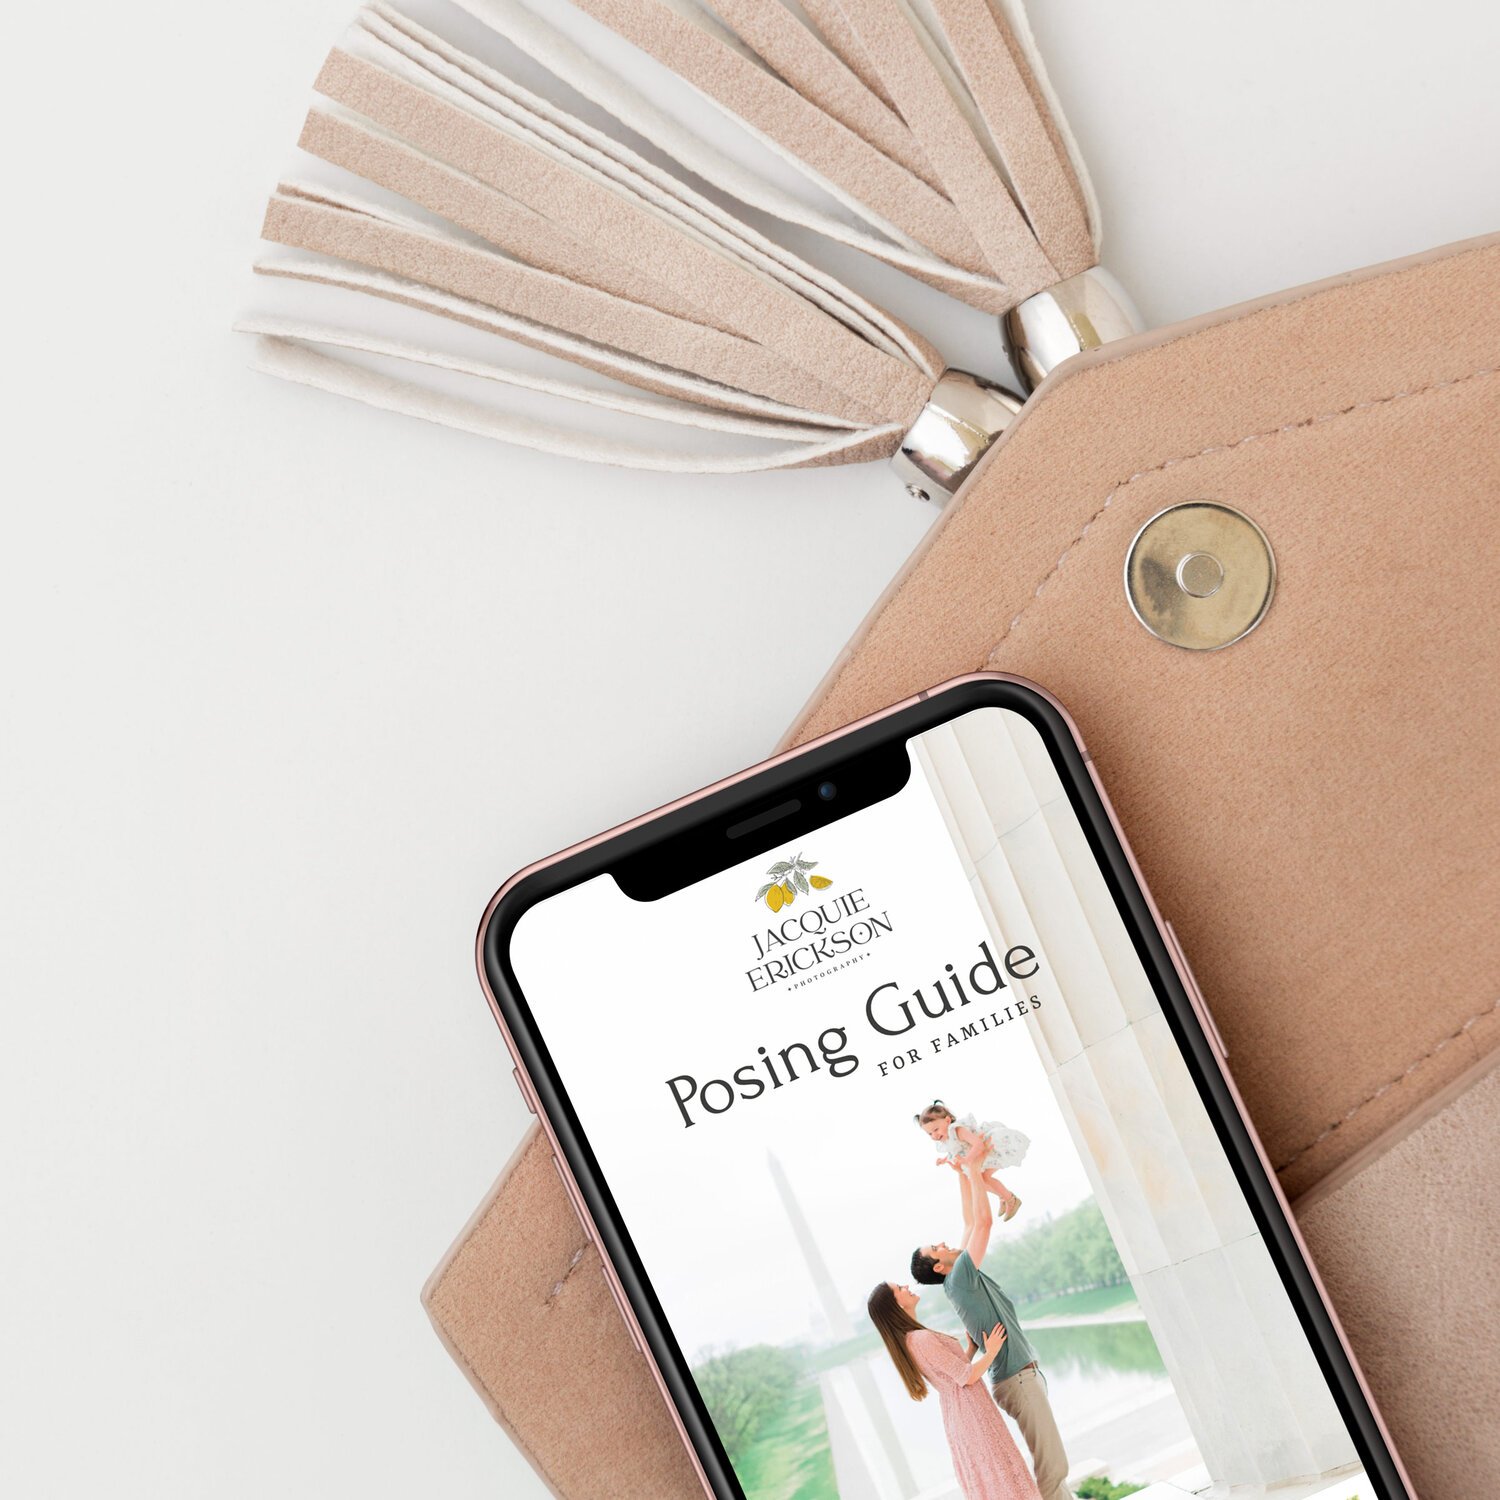  An iPhone rests on a clutch open to a posing guide, a website by Jacquie Erickson Atlanta-based photographer. Client questionnaire Momtog course streamline workflow small business helpers #planoly #dubsado #pixiset #tailwind #theunburdenstudio #phot